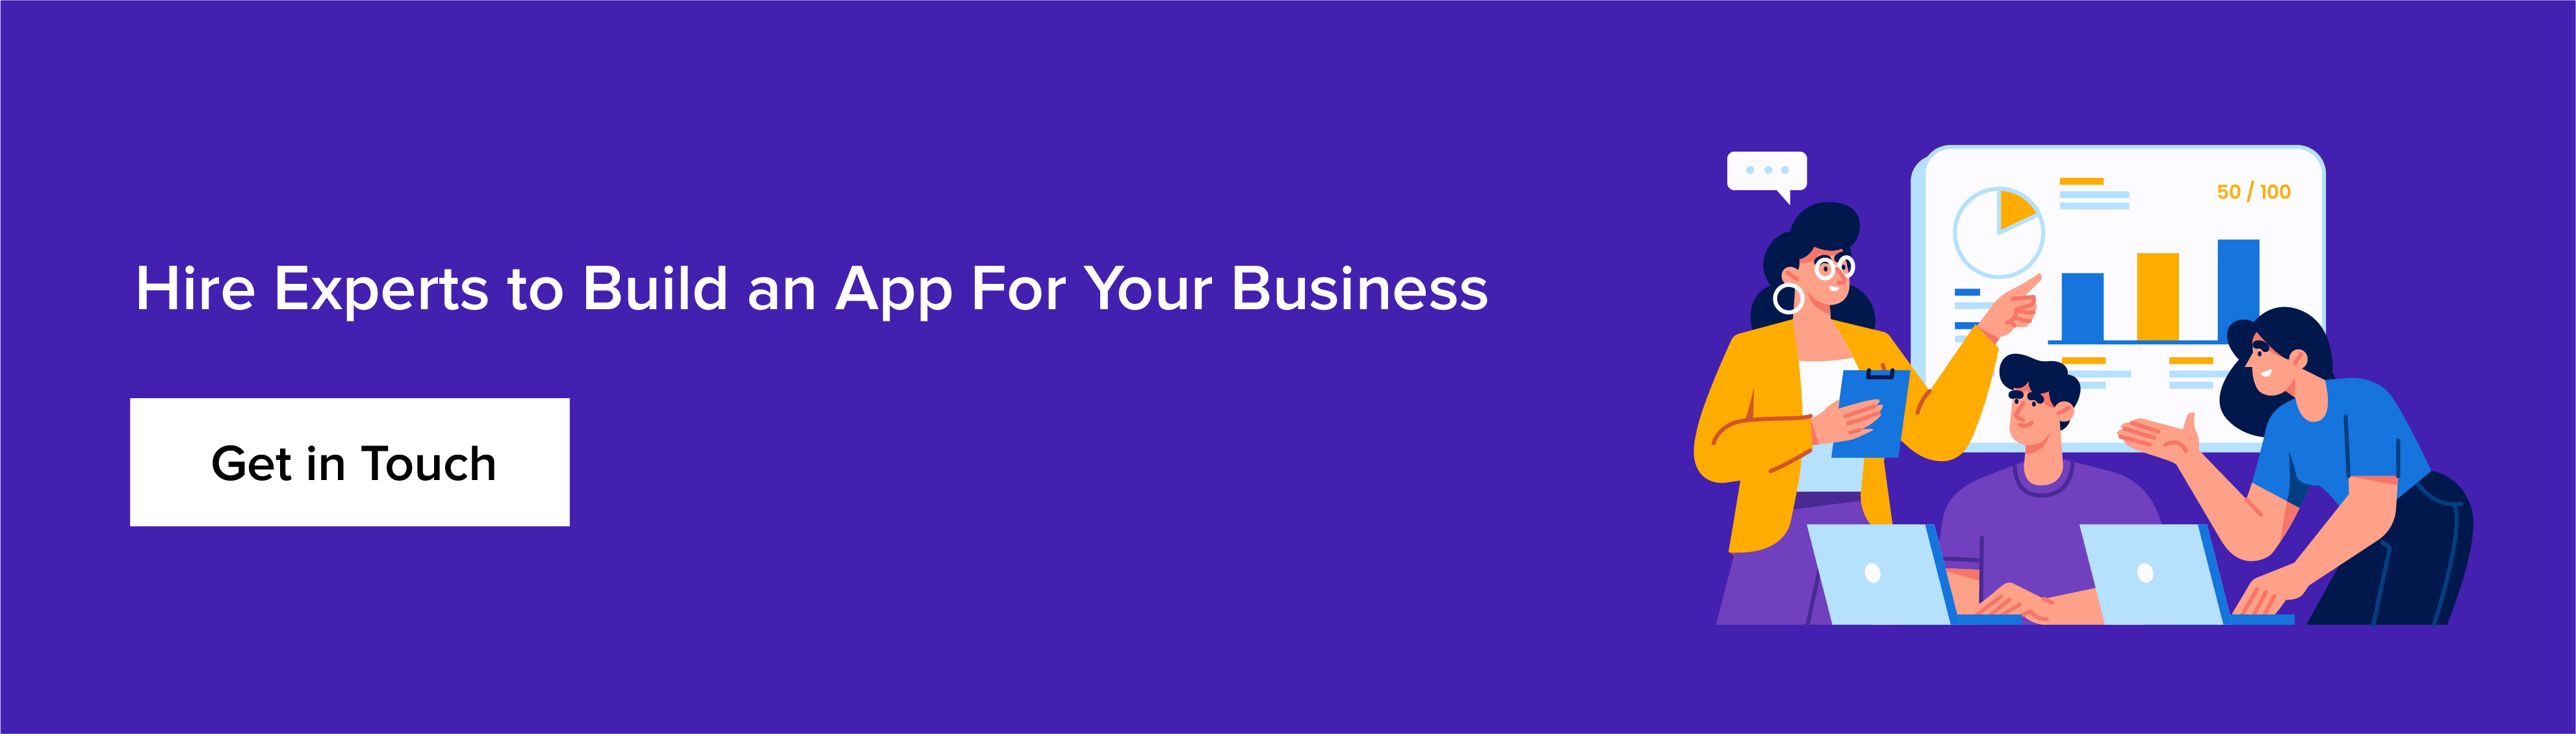 build an app for your business